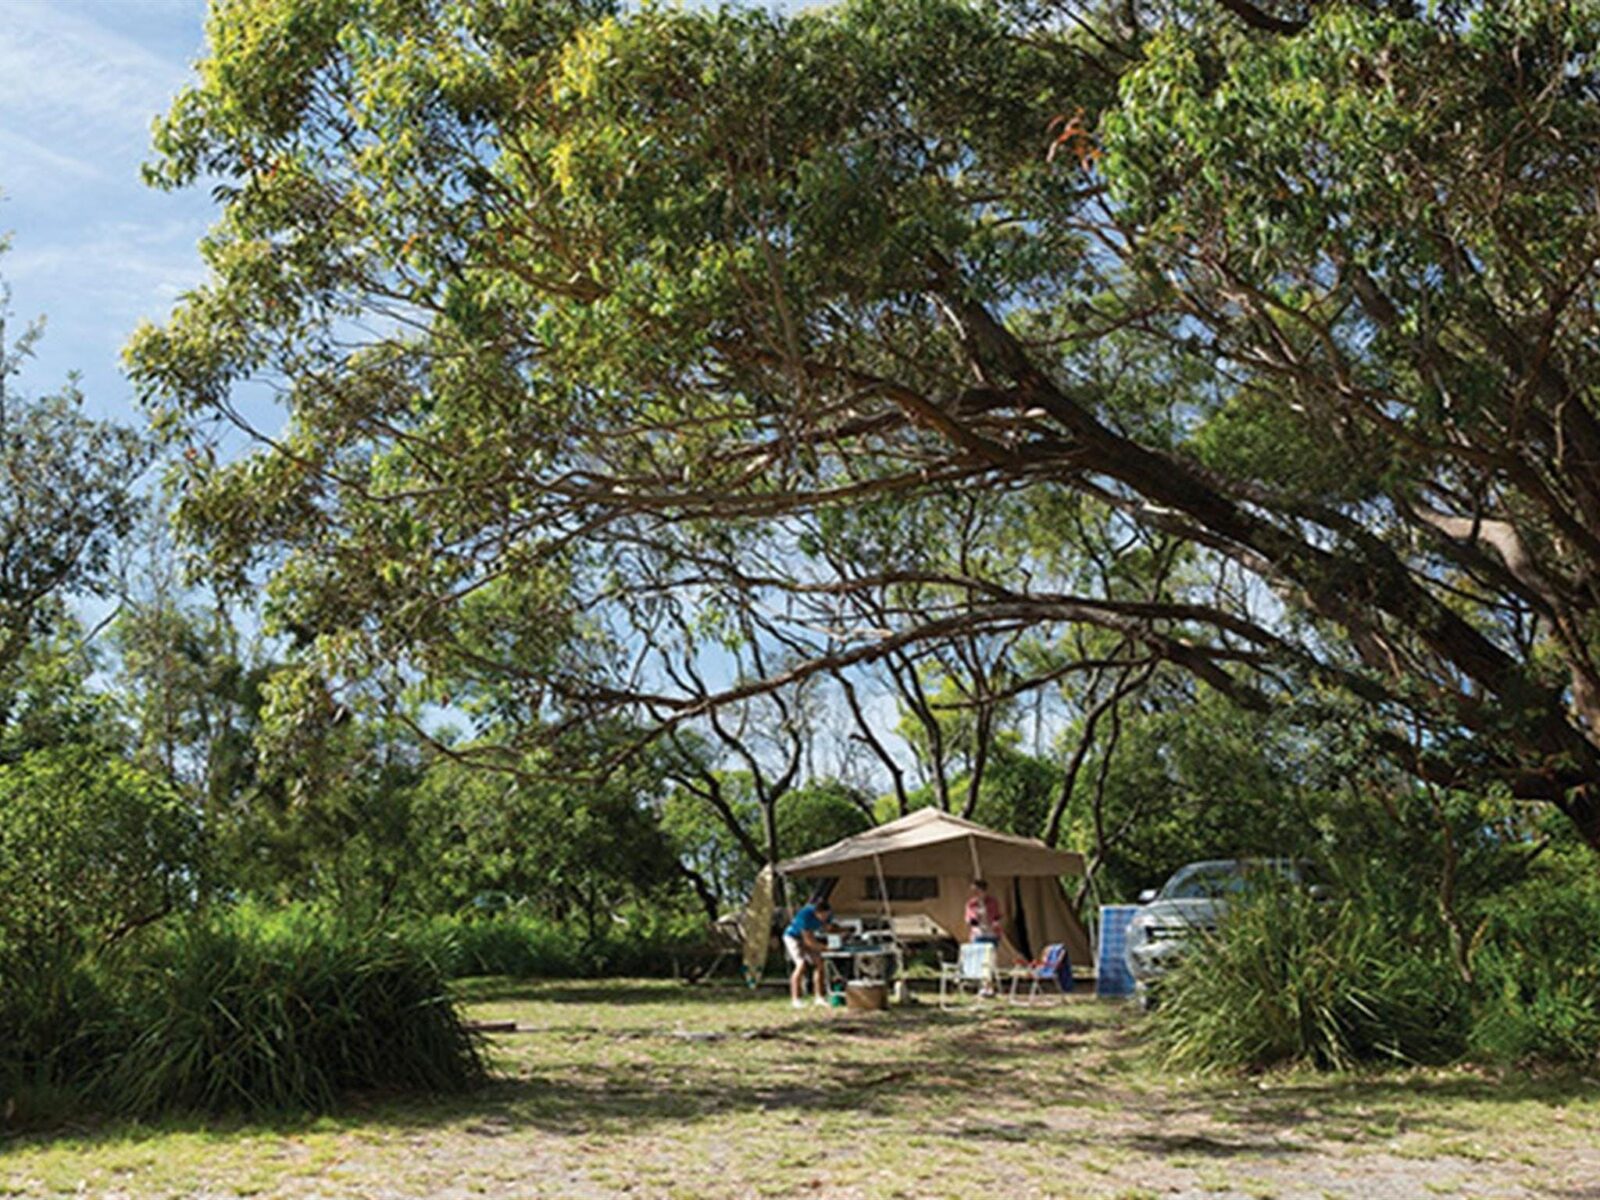 Campers at their tent surrounded by trees in Aragunnu campground, Mimosa Rocks National Park. Photo: